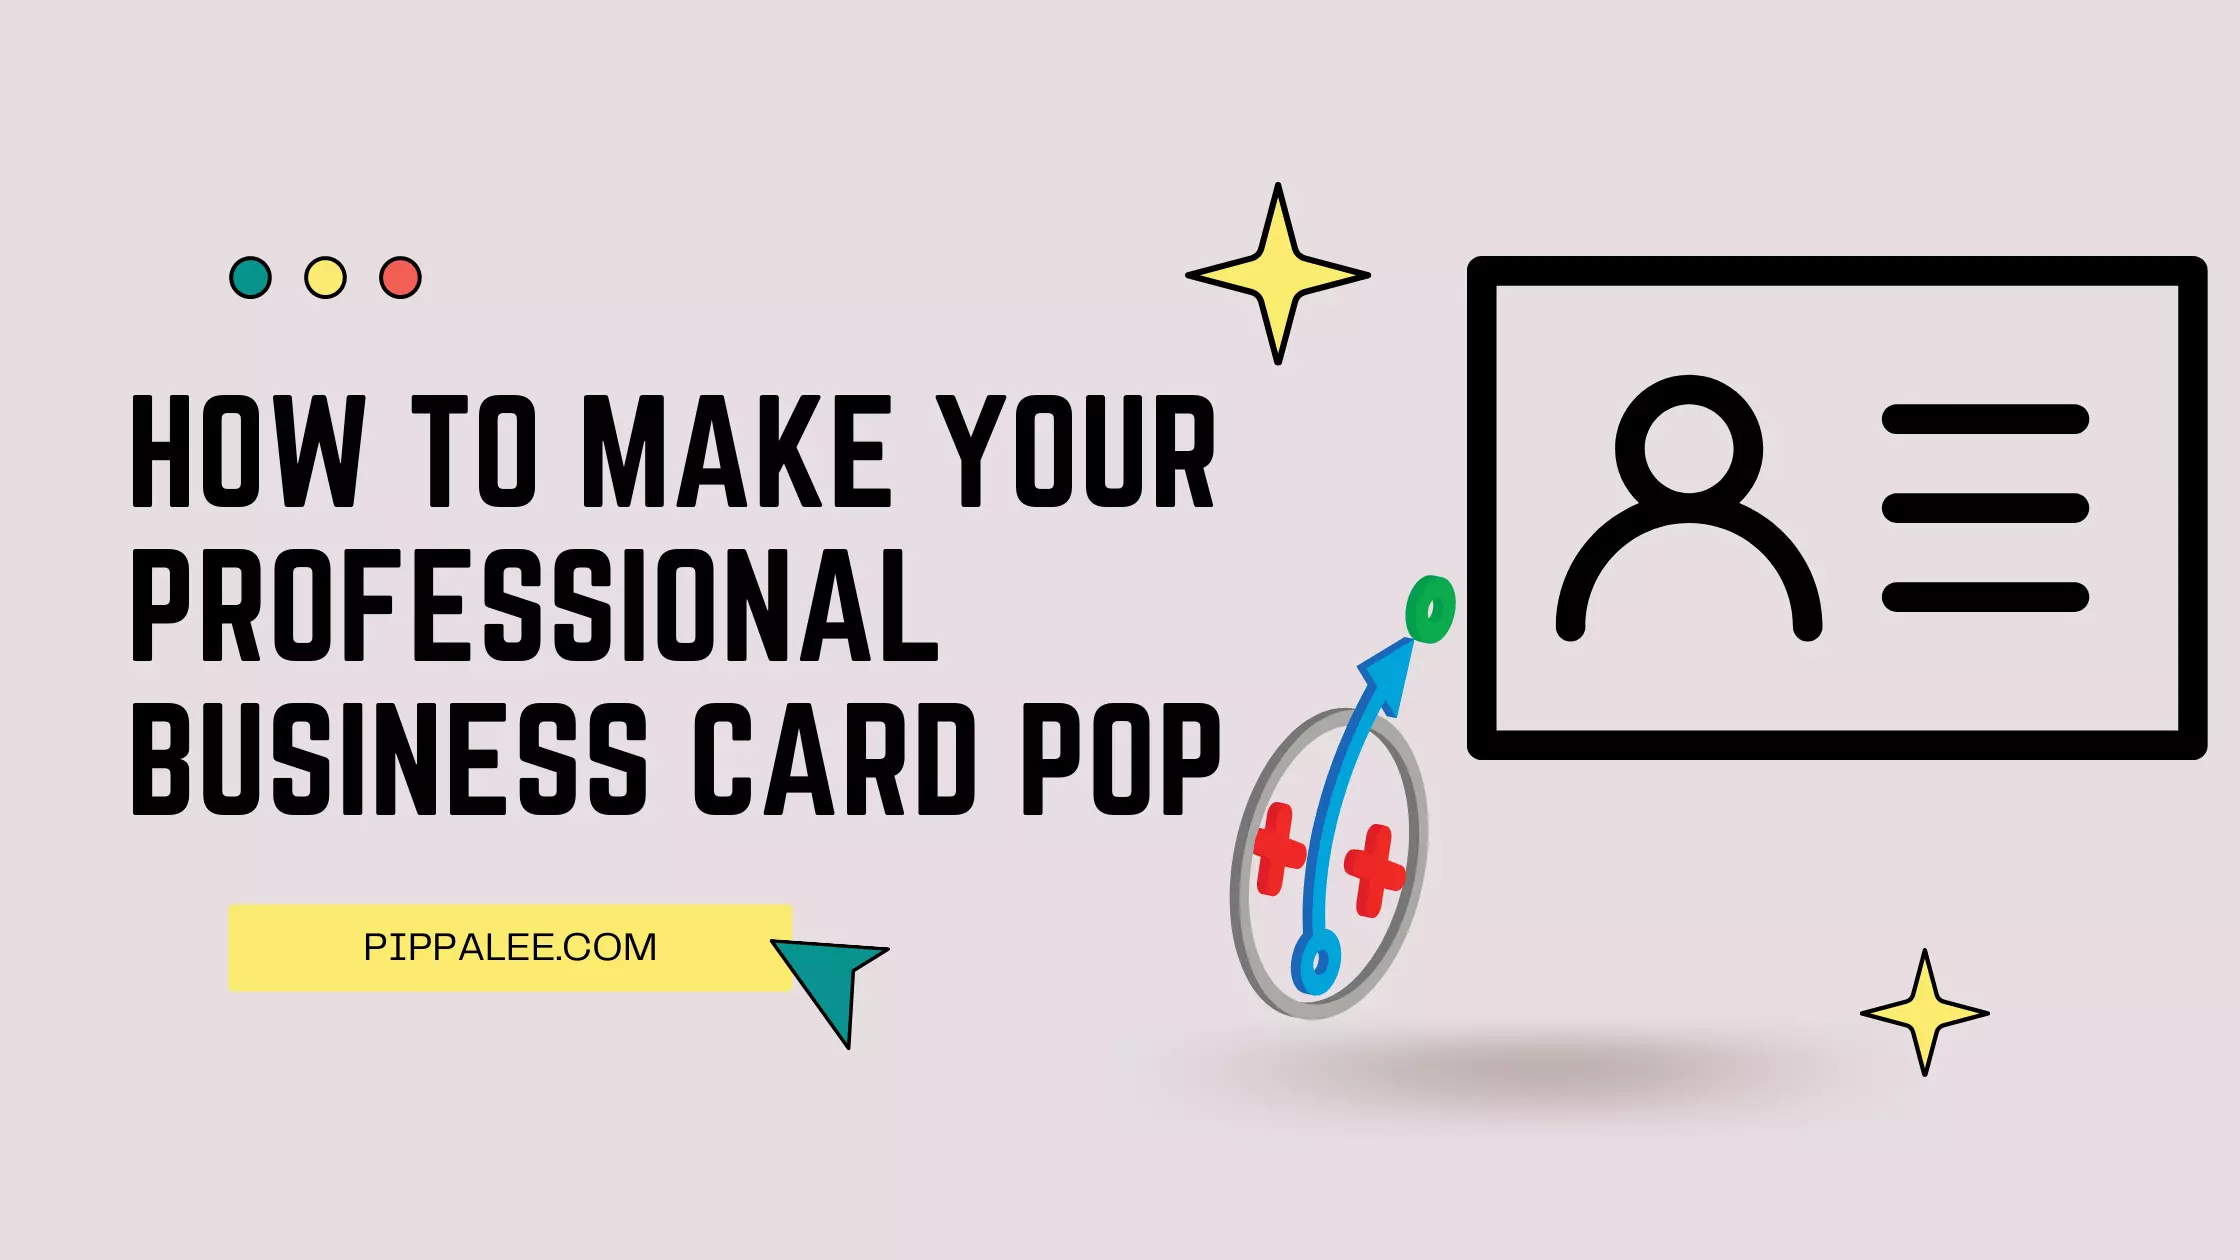 Get Creative: How to Make Your Professional Business Card Pop